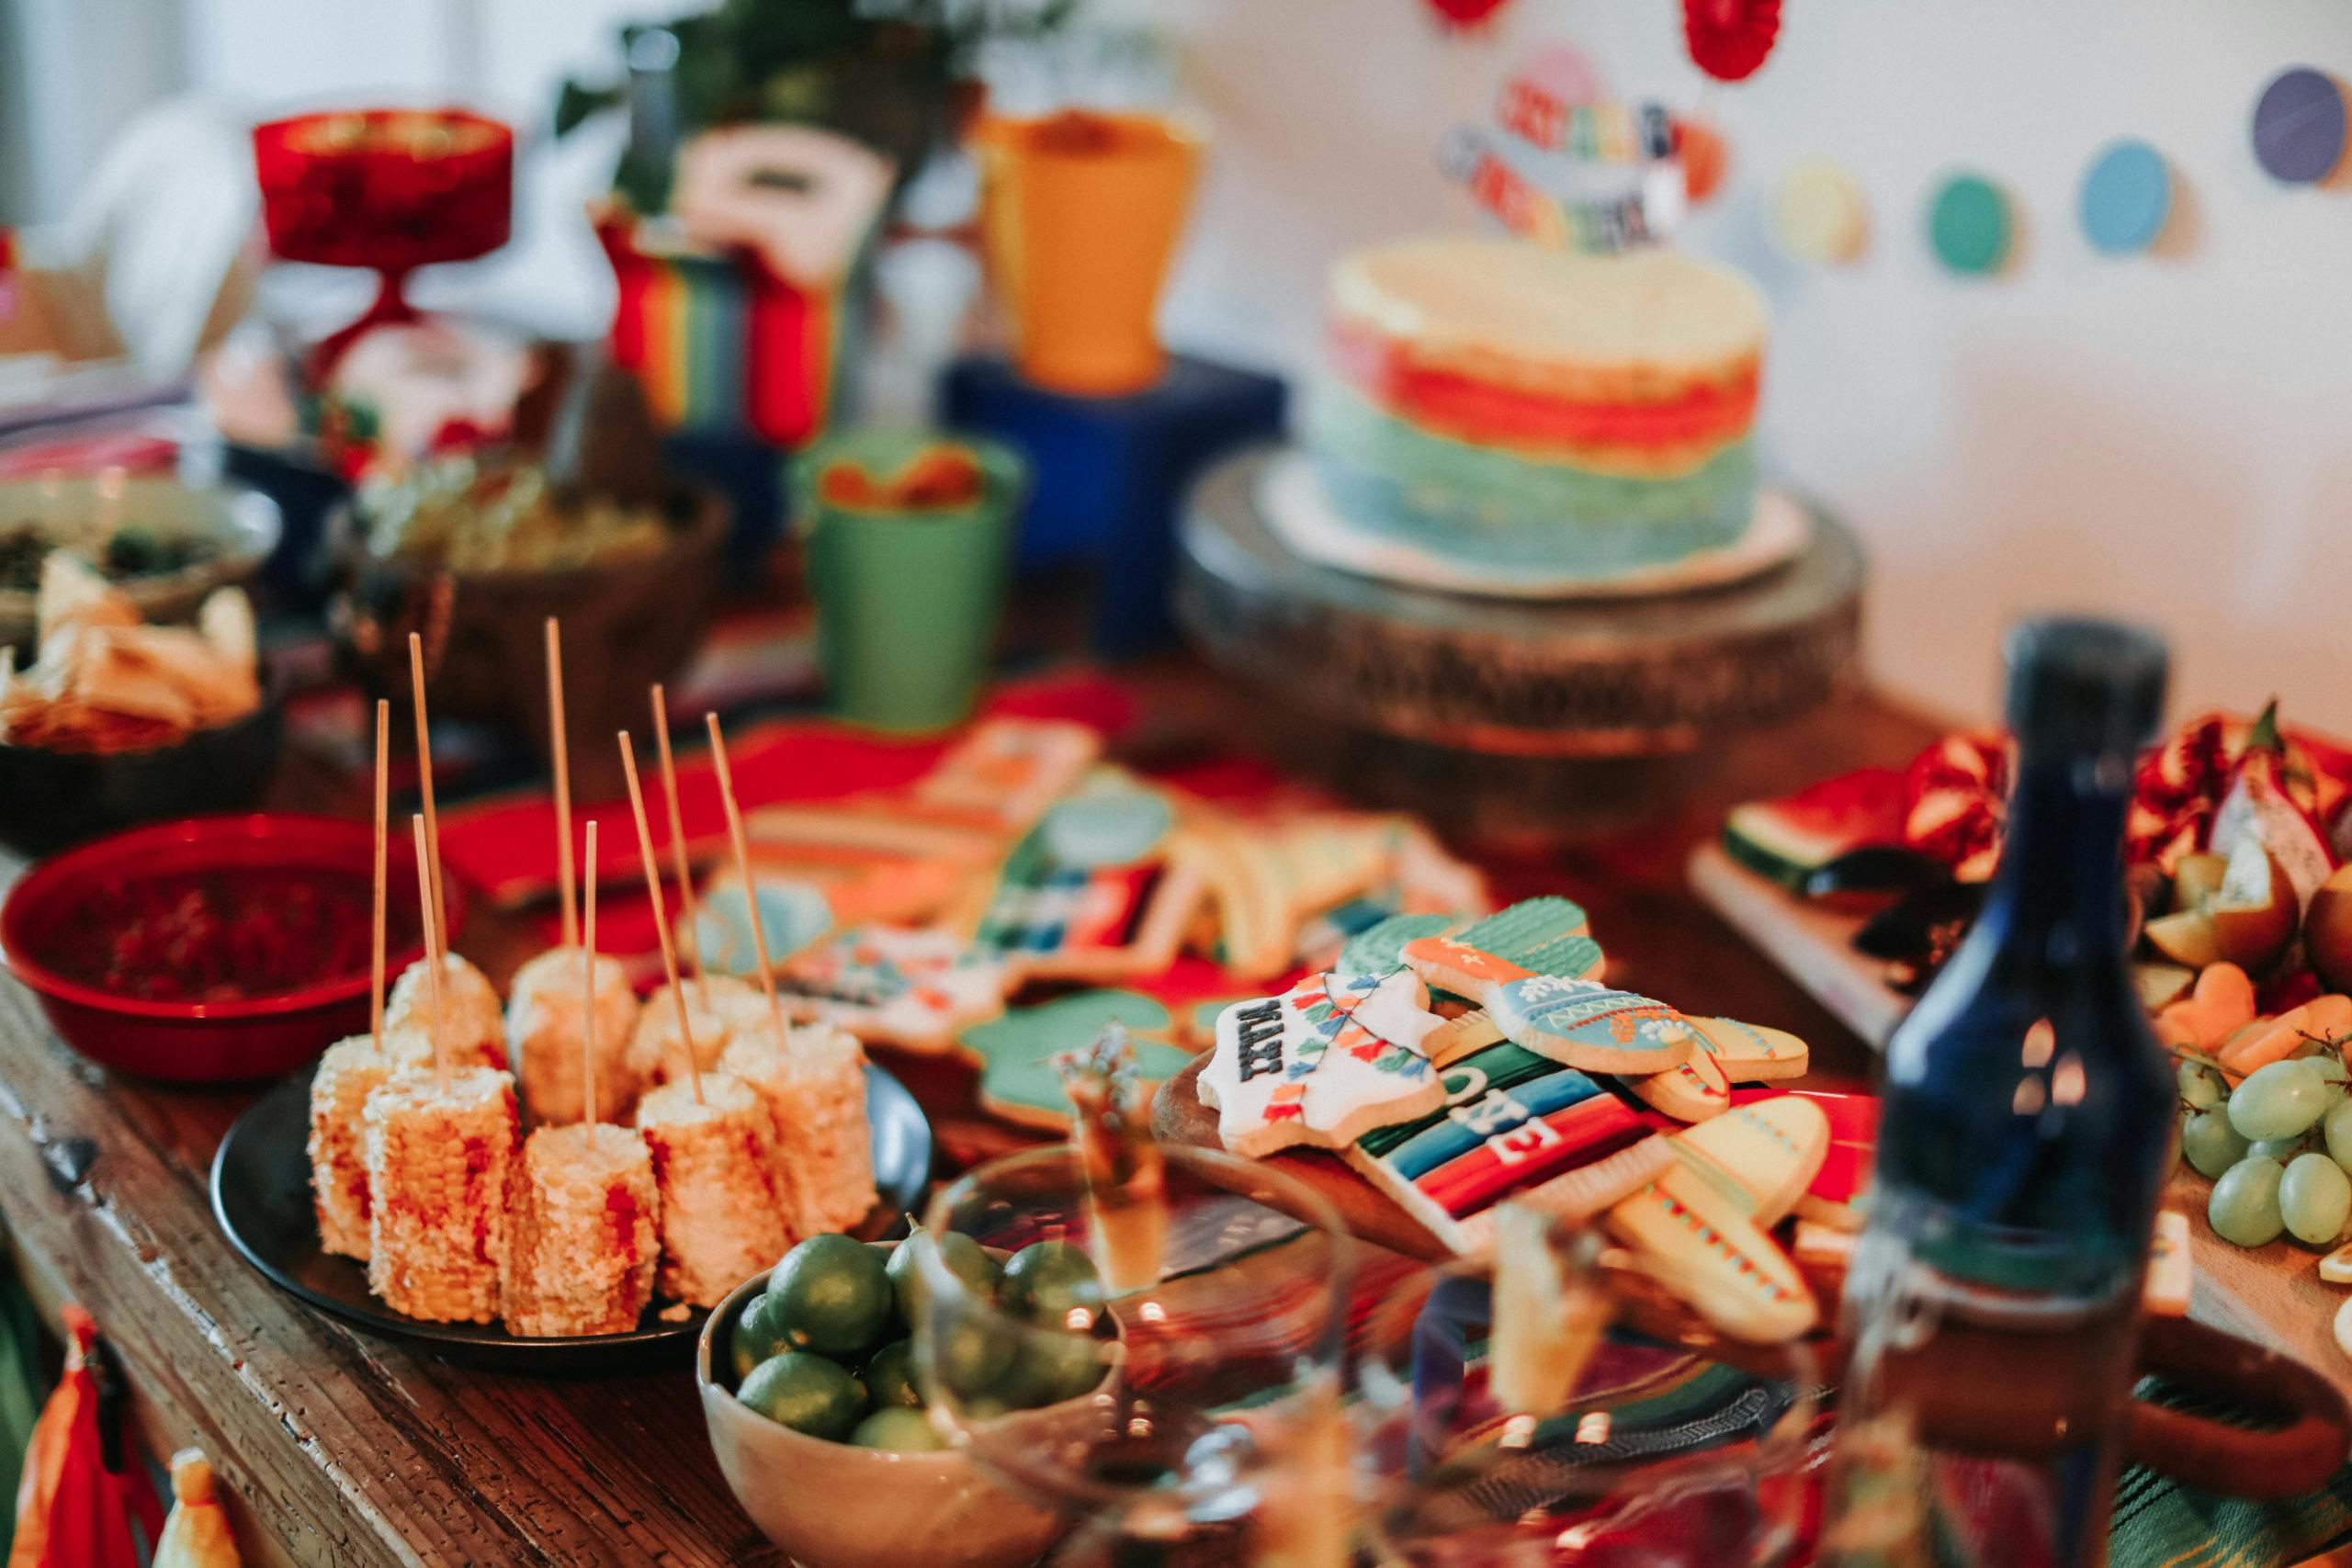 Baby's First Birthday Fiesta in Miami Beach, Florida with Mexican Food and Desserts | PartySlate